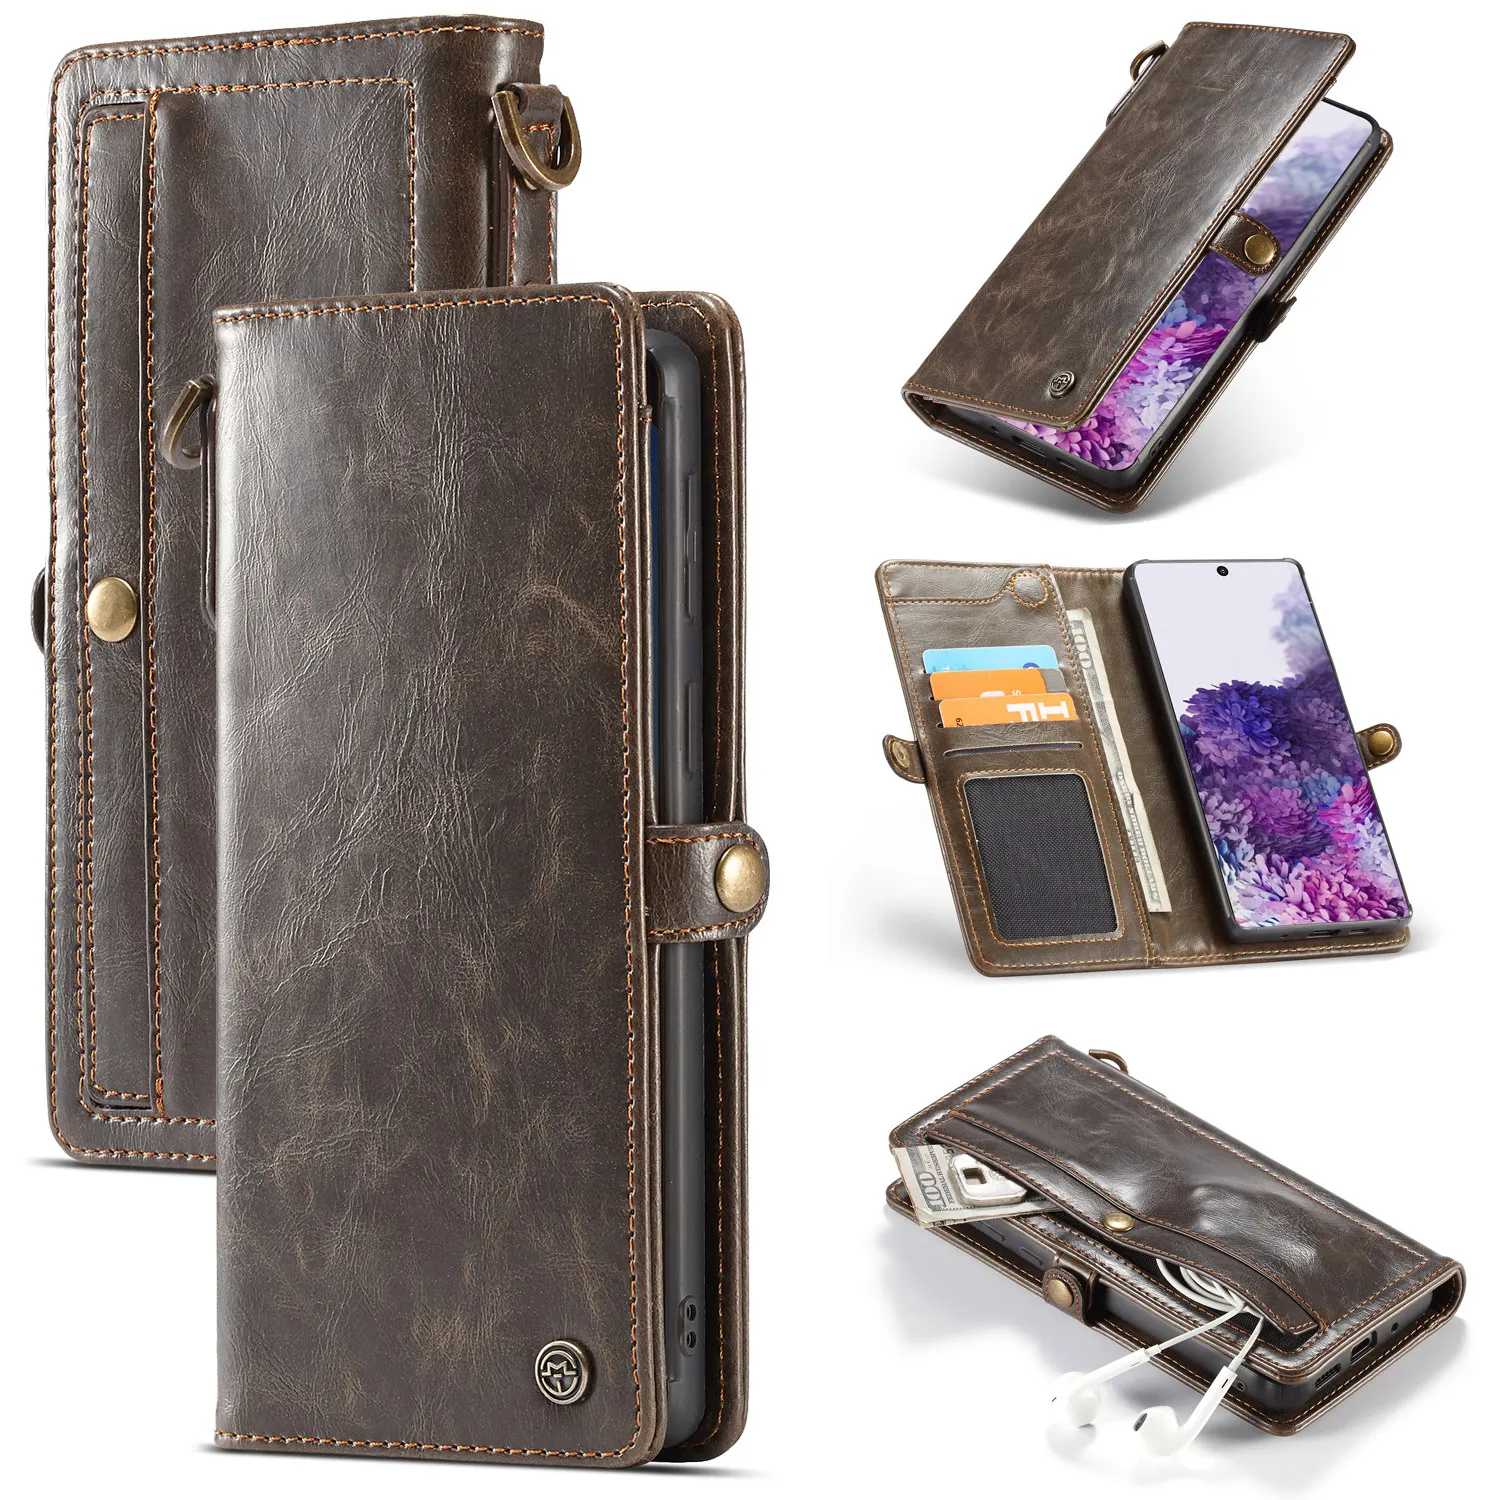 

For Samsung Galaxy Note 20 S20 Ultra Note 10 Plus Original Case CaseMe Retro Flip Leather Magnetic Removable Wallet Case Cover